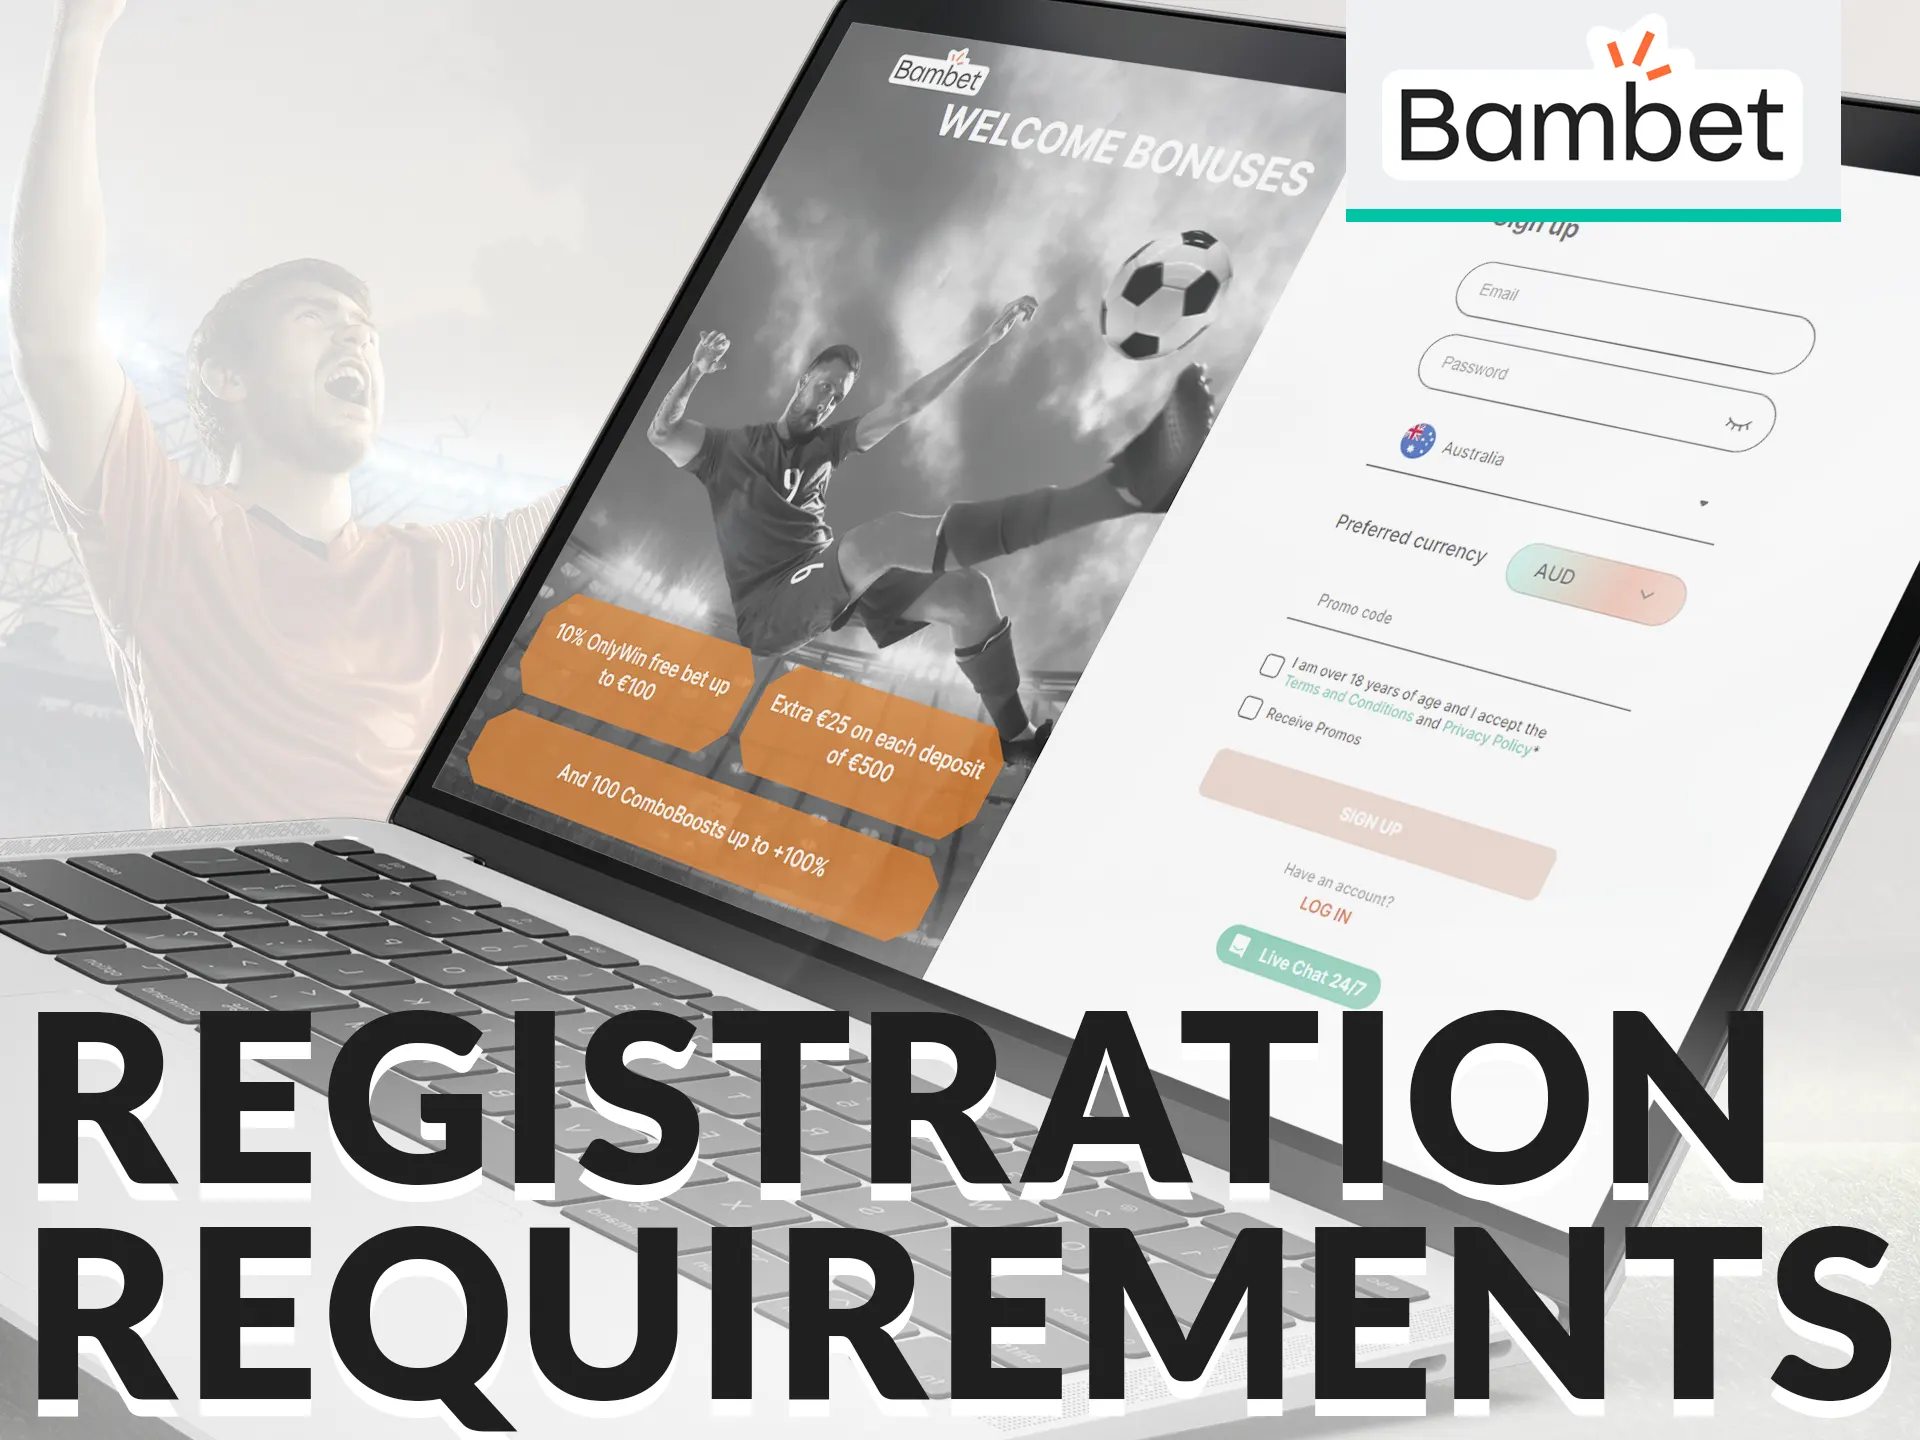 Follow certain Bambet rules and guidelines to register your account.